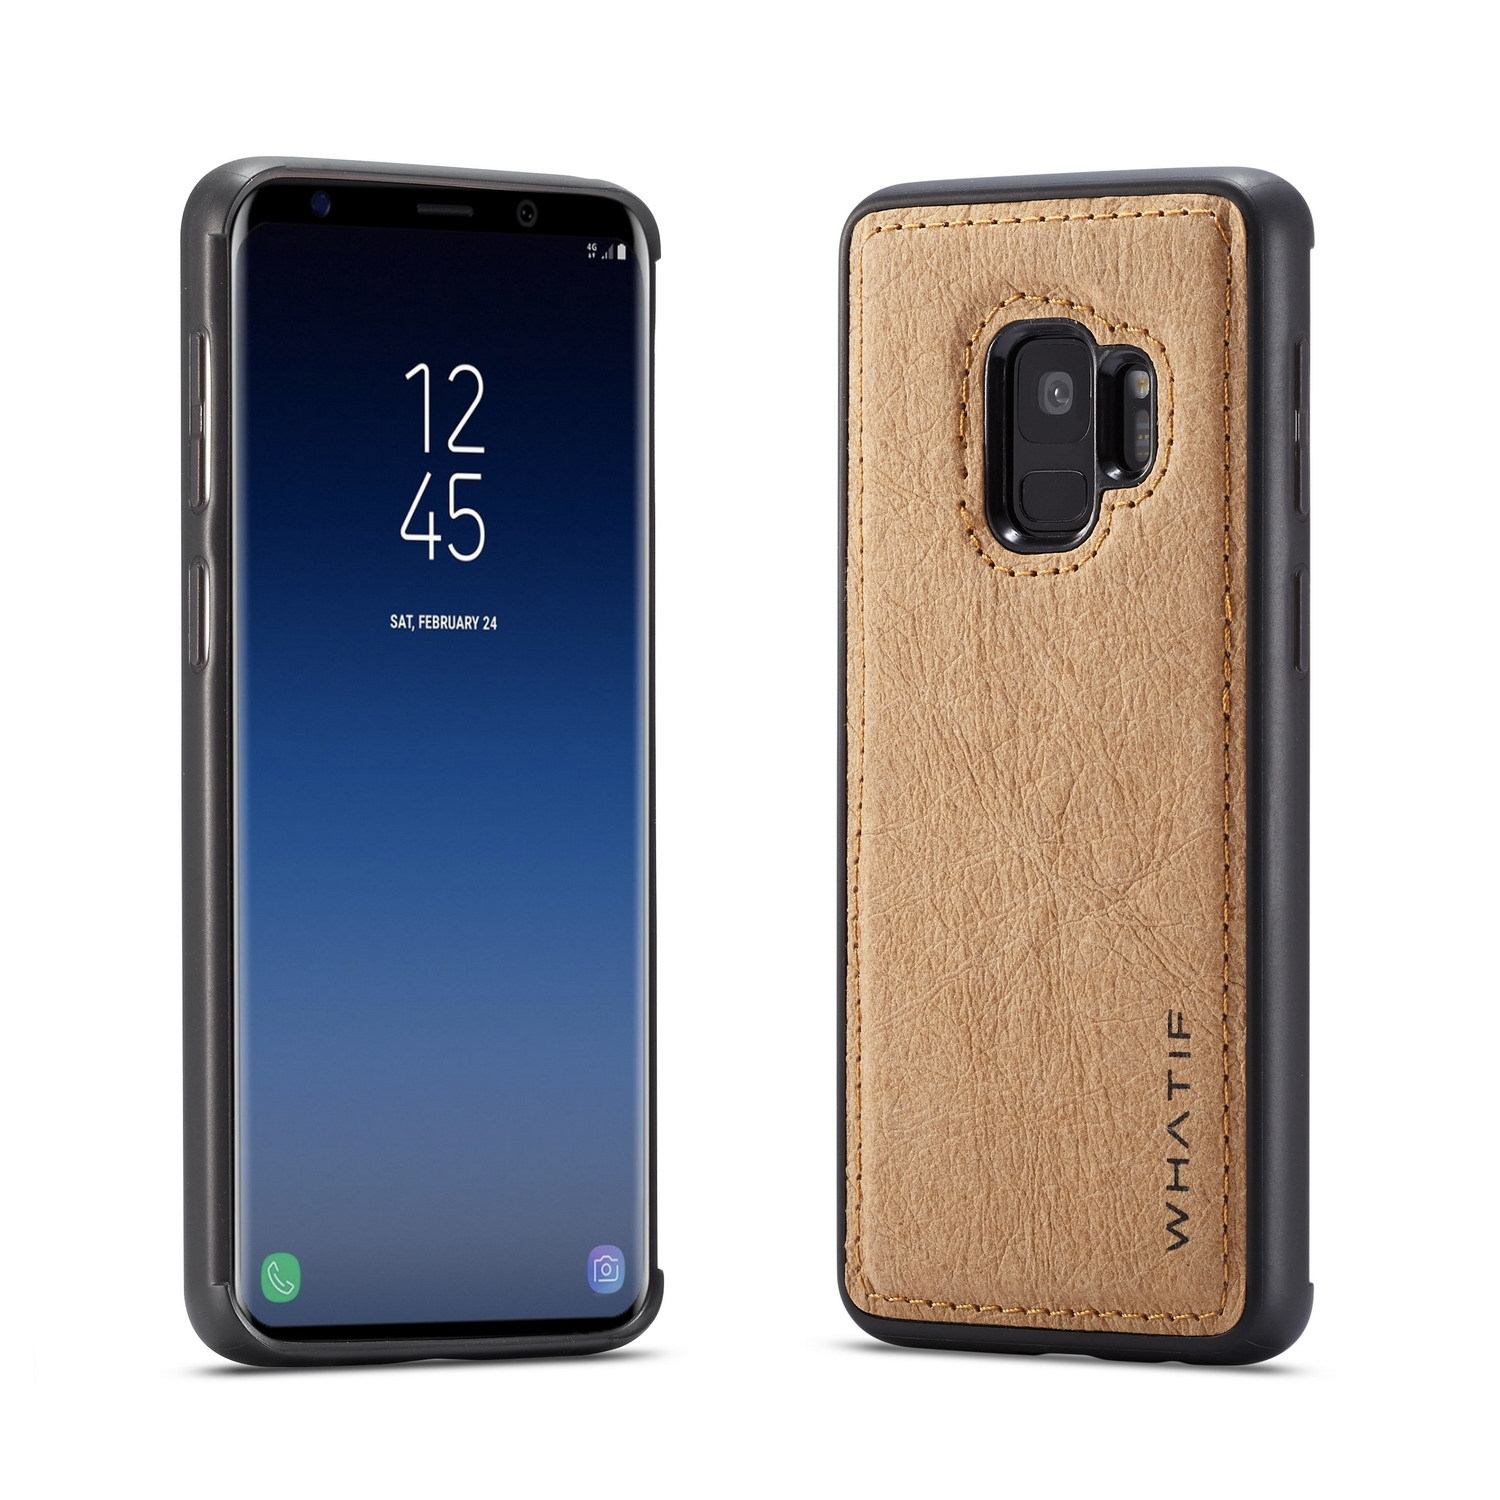 WHATIF Waterproof Shockproof Protective Case For Samsung Galaxy S9 2